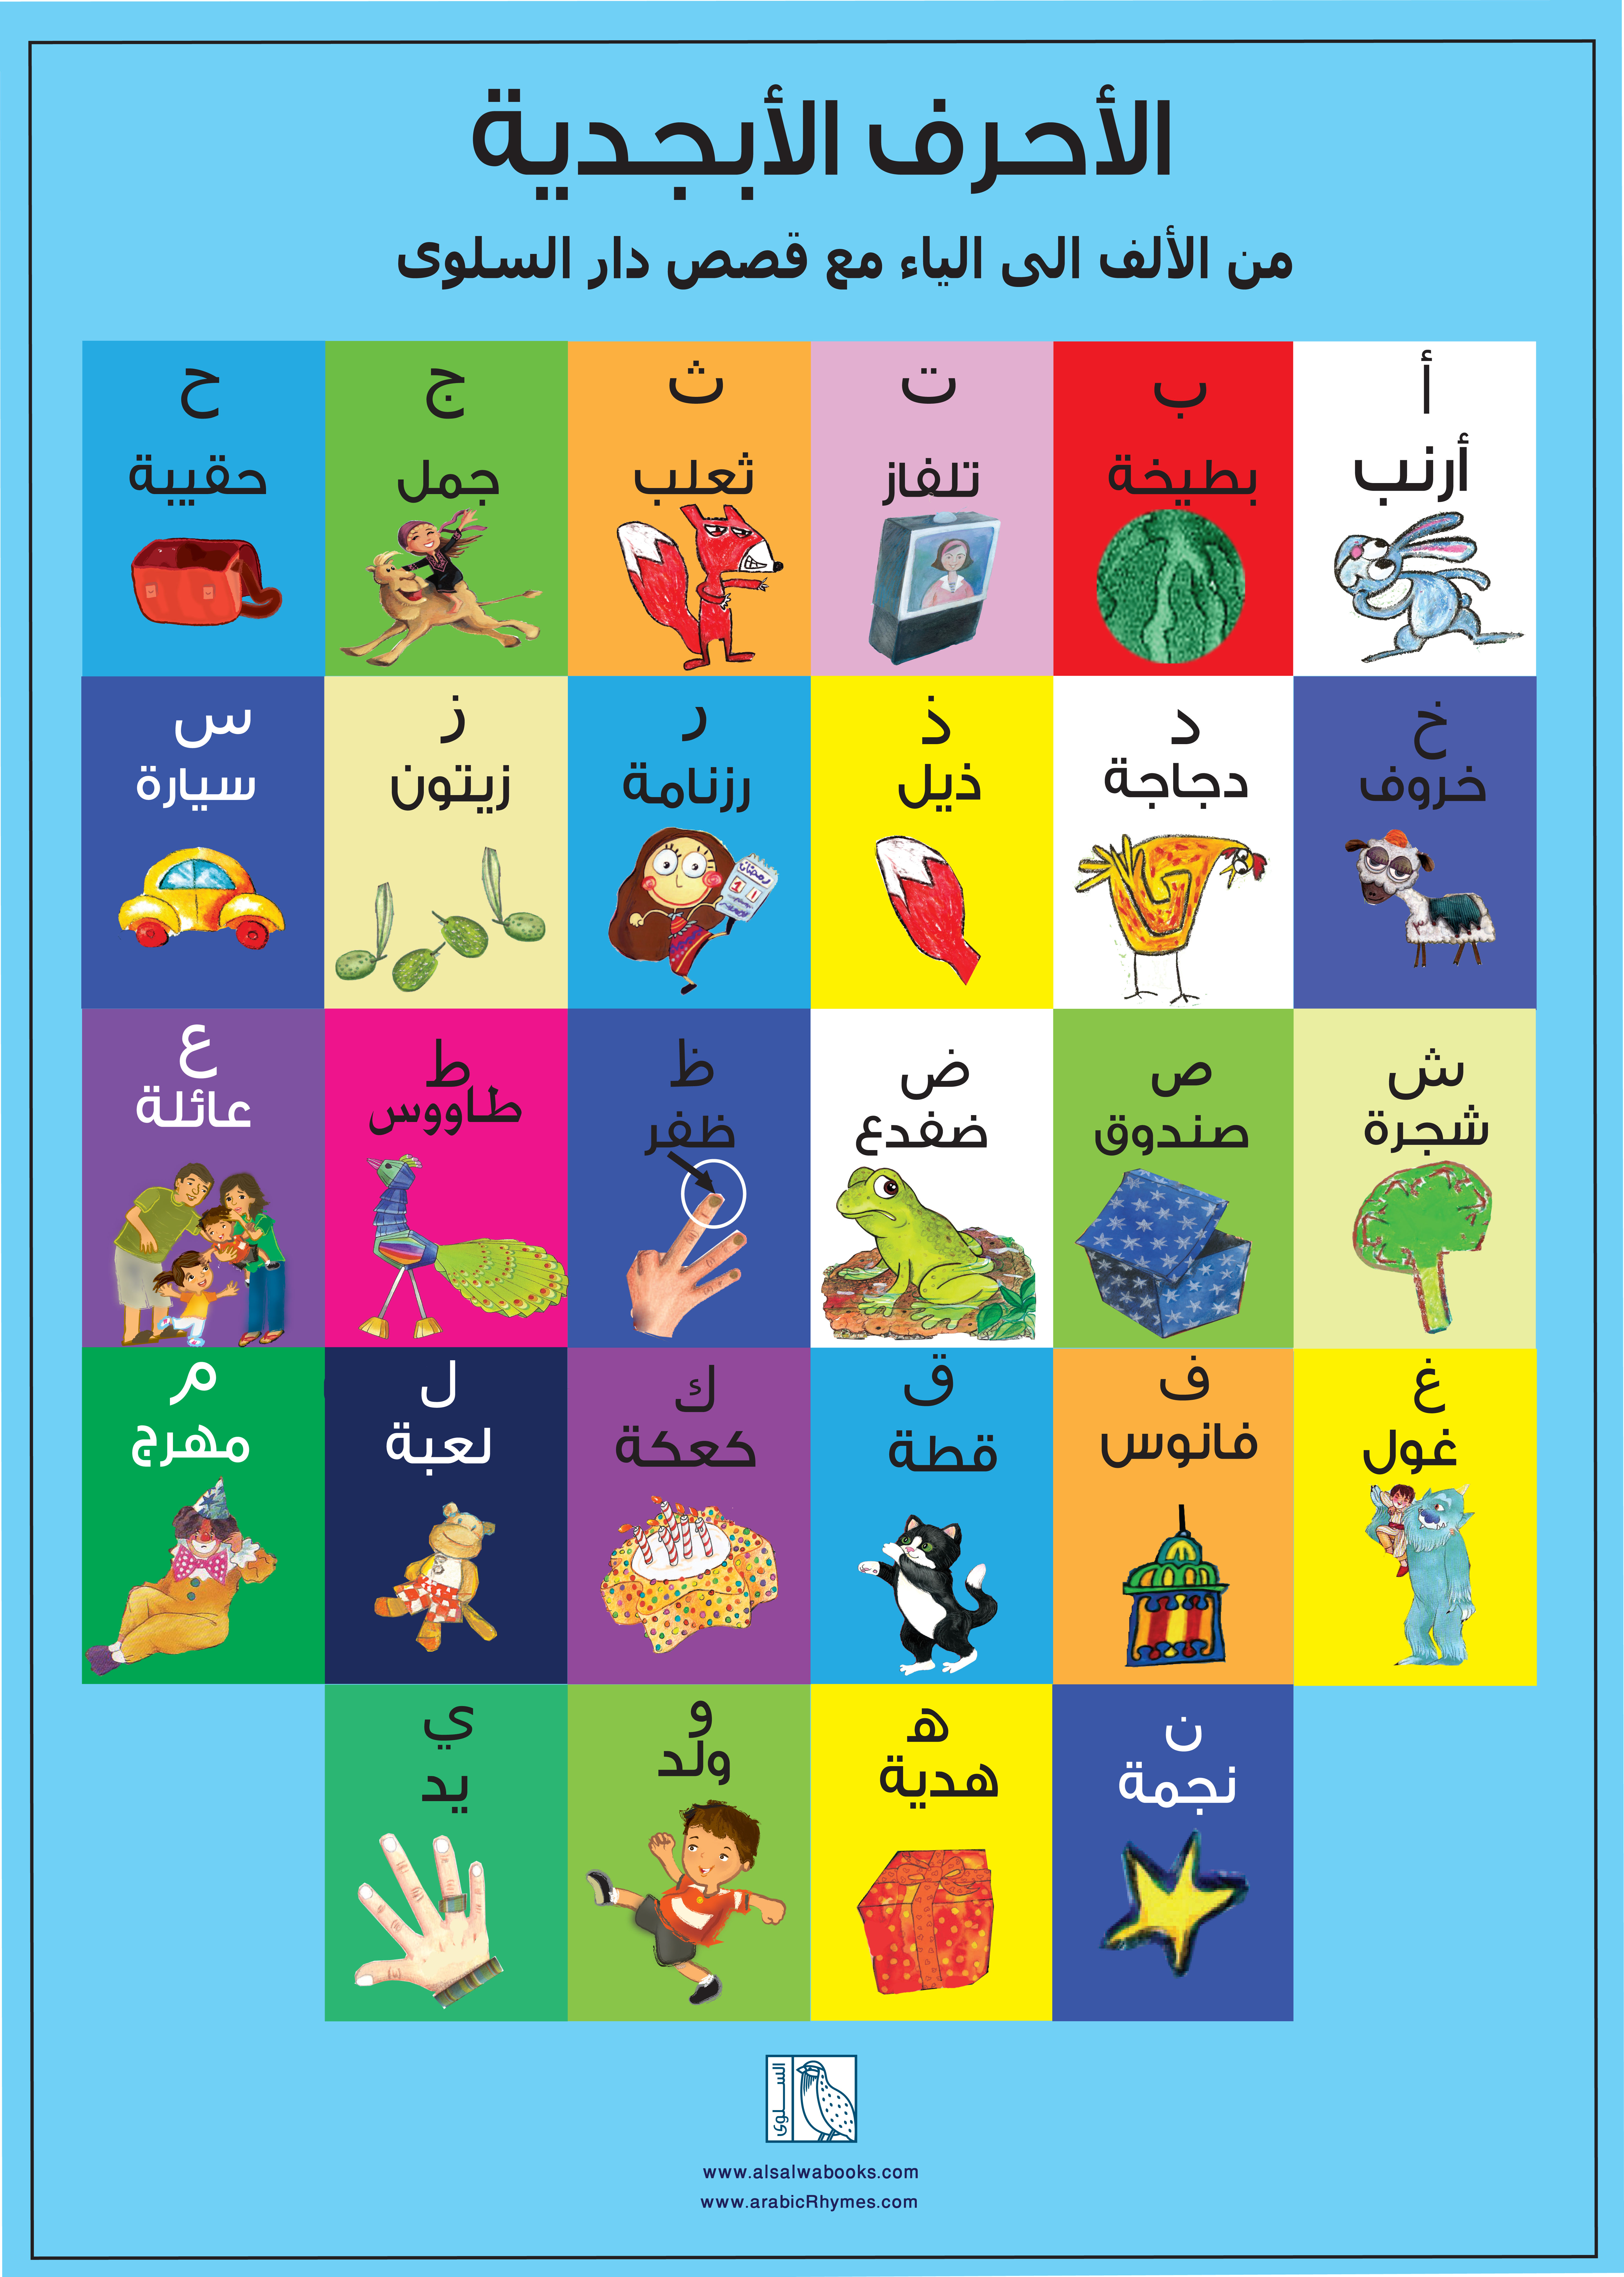 arabic-sign-language-words-clip-art-library